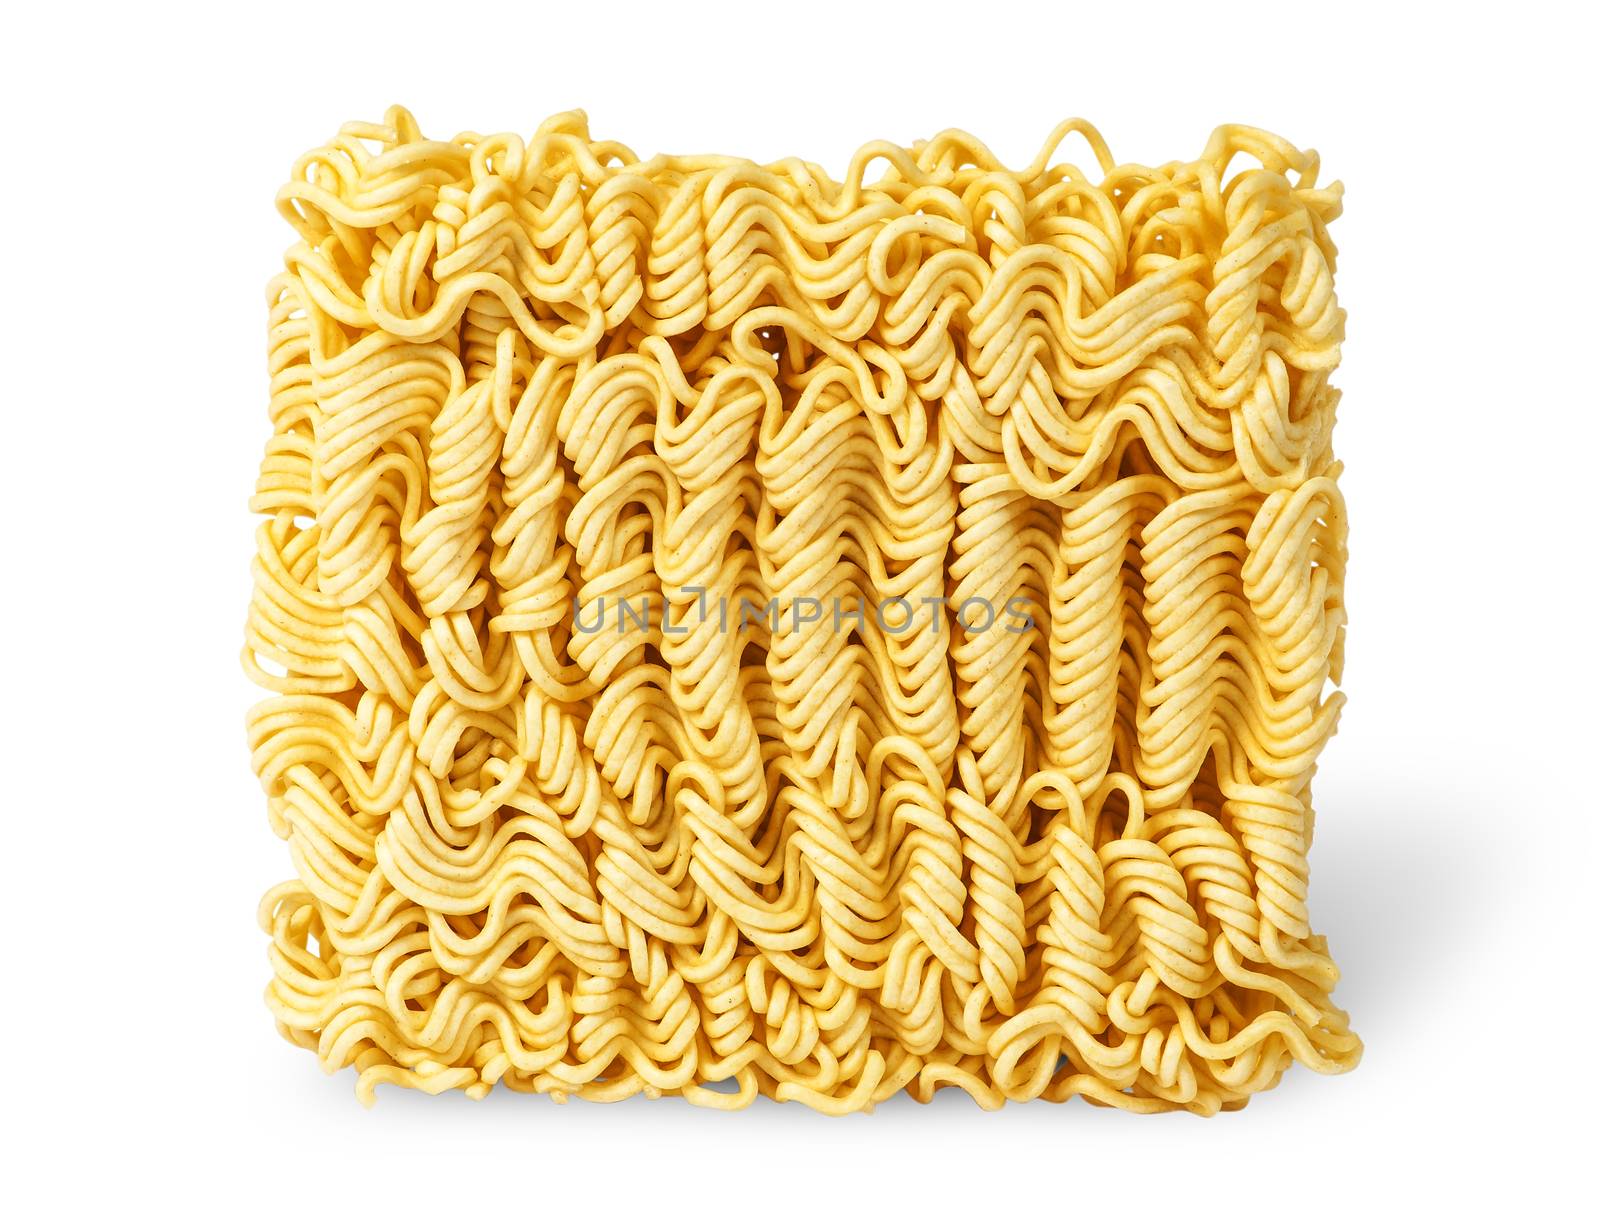 Noodles of fast preparation vertically isolated on white background